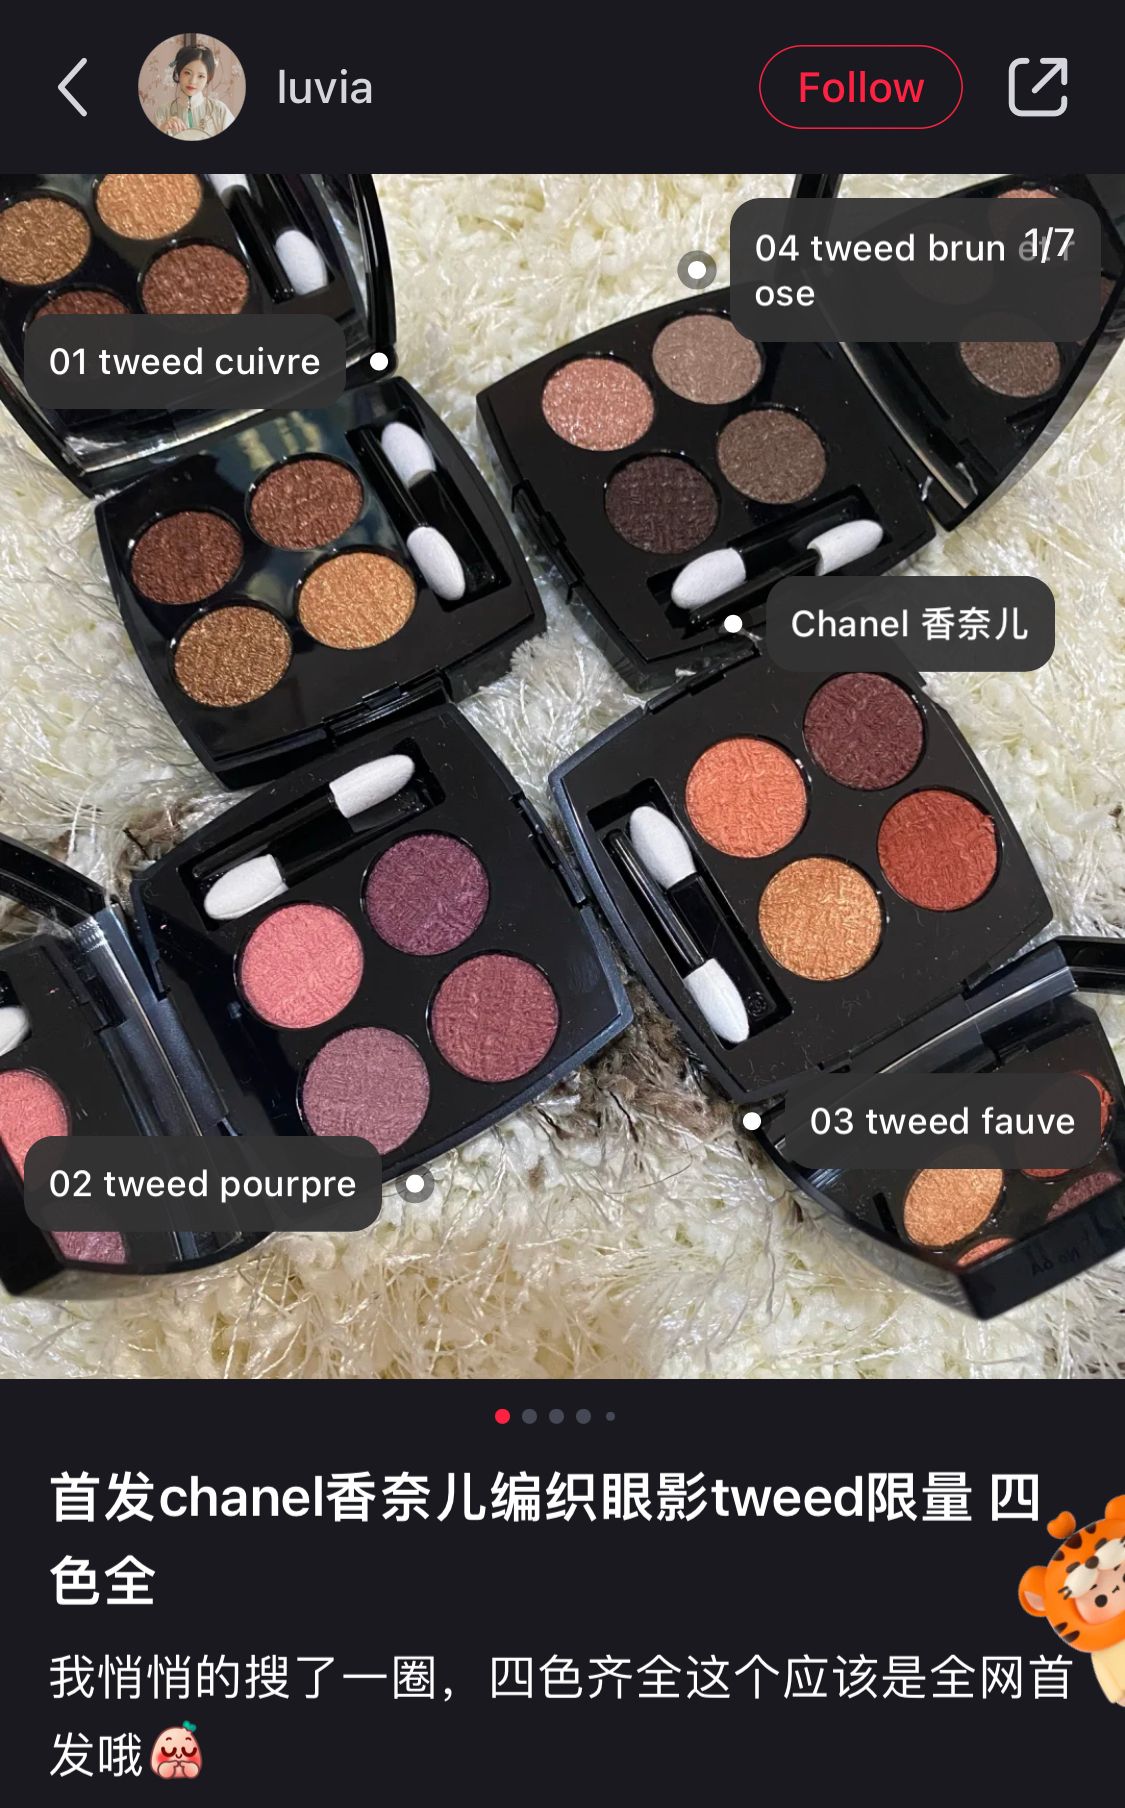 sale* Chanel Les 4 Ombres Tweed eyeshadow palette , Beauty